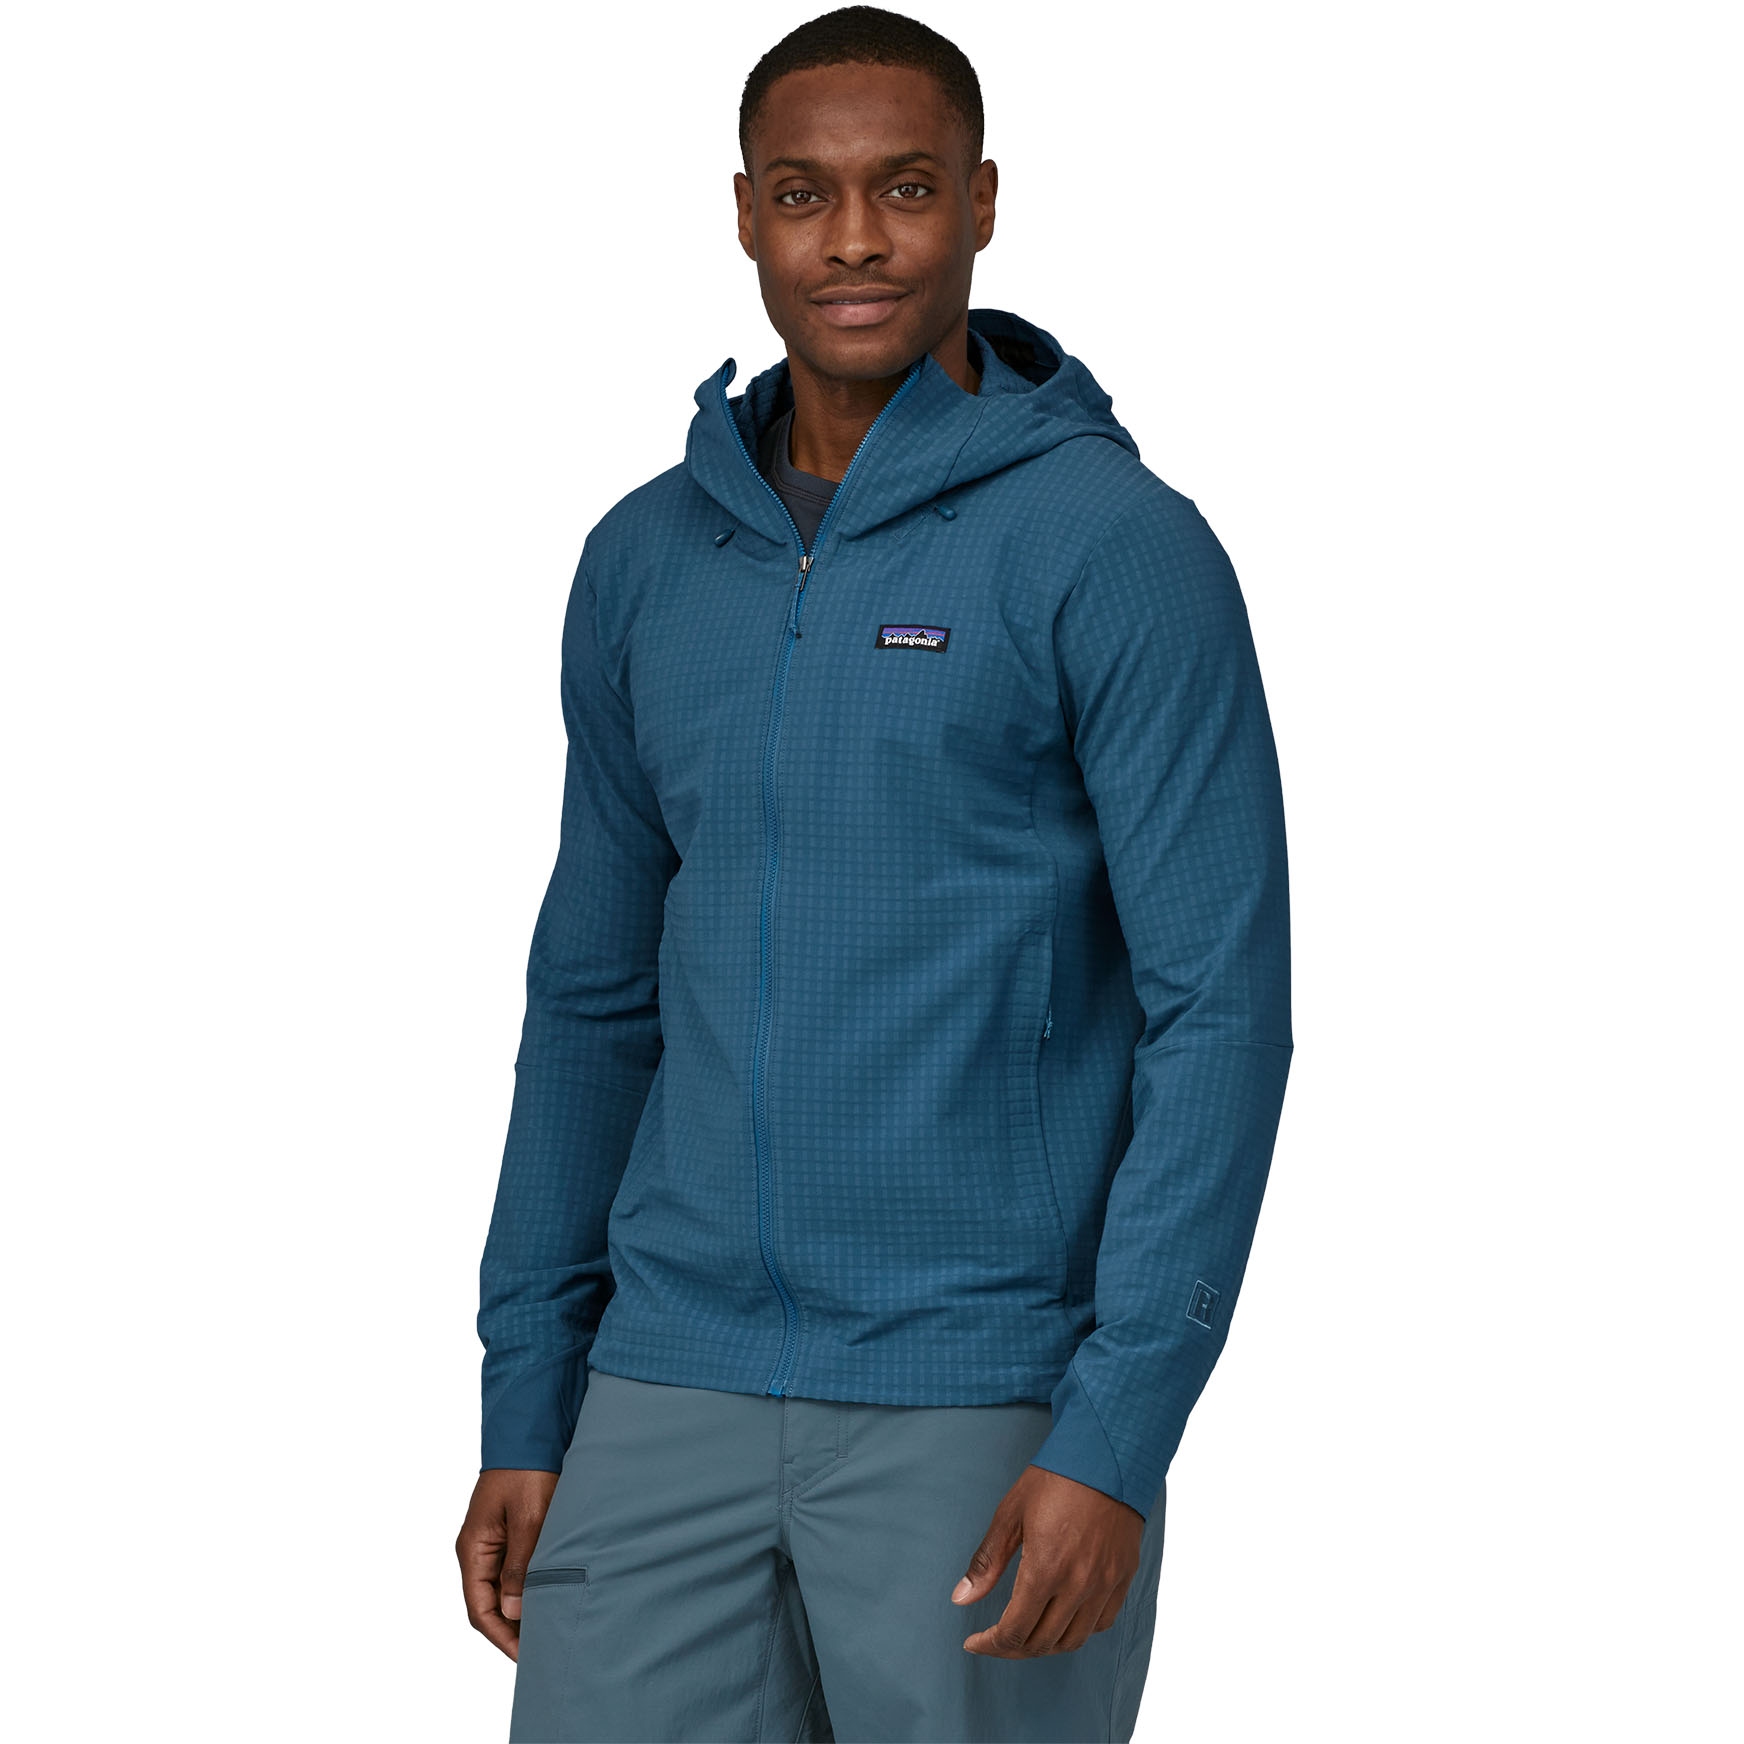 Patagonia R1 Techface Hoody – M & F versions are great